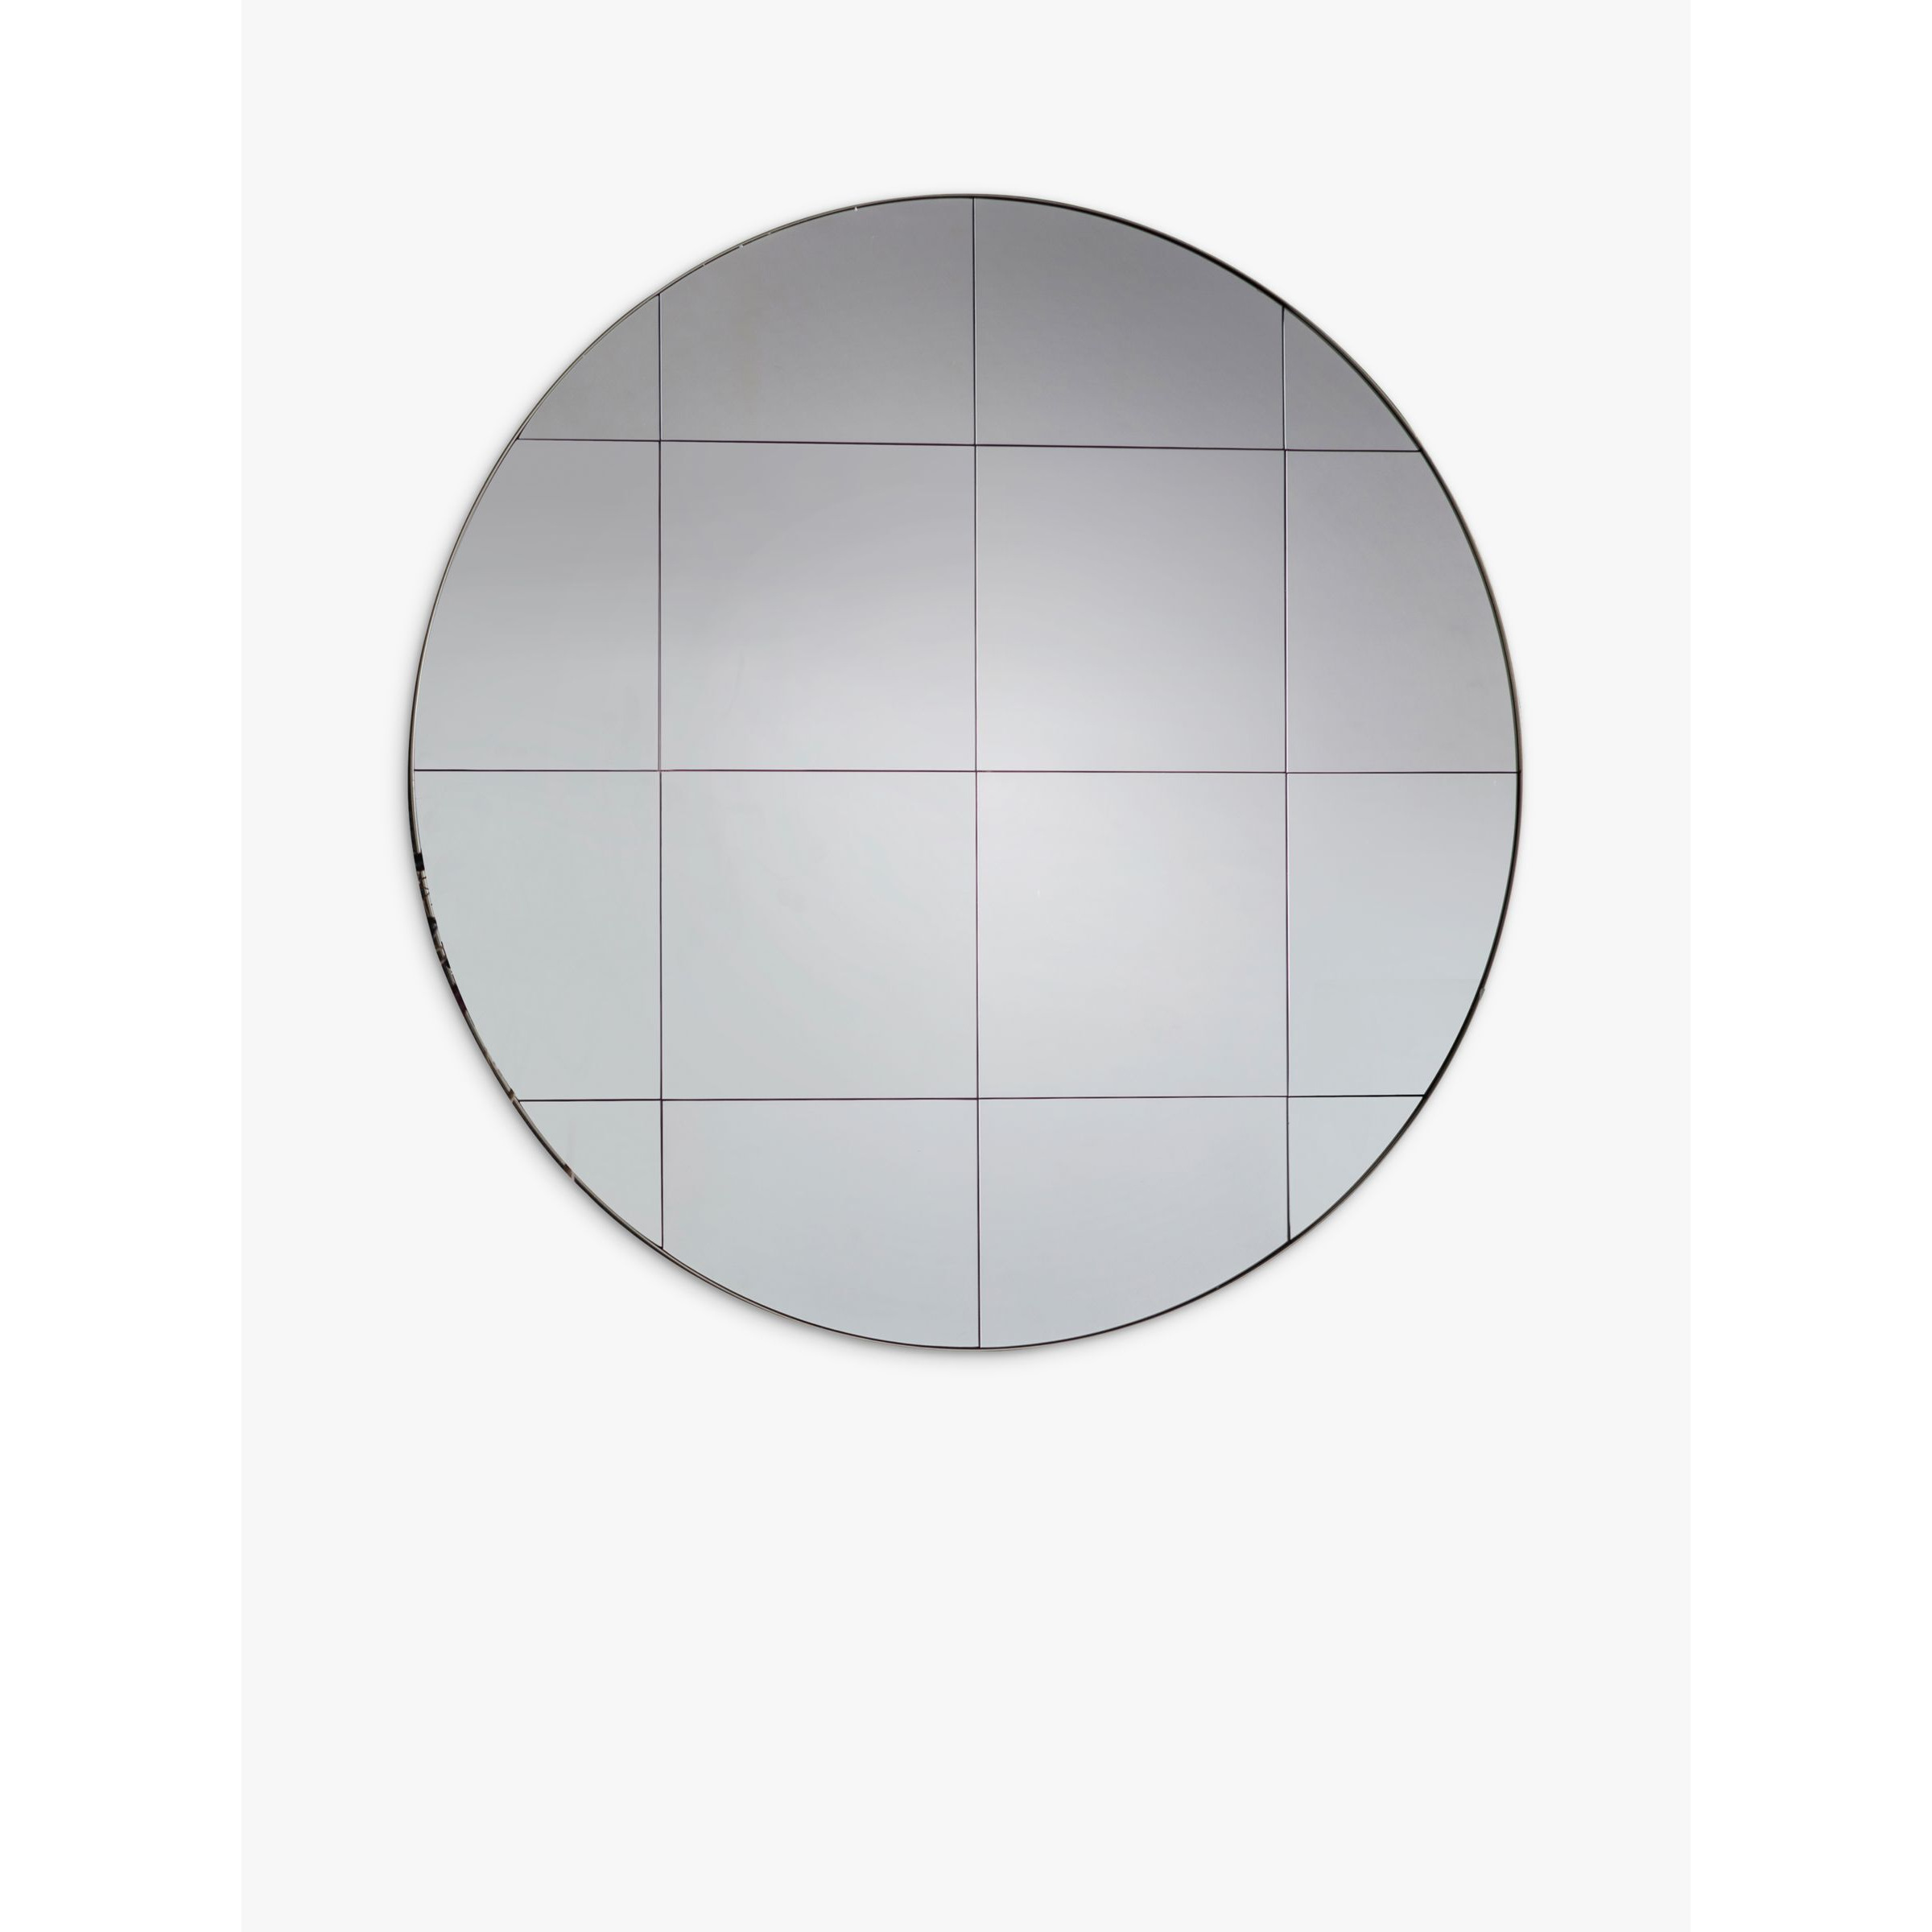 Gallery Direct Boxley Round Metal Frame Mirror, 100cm, Silver - image 1